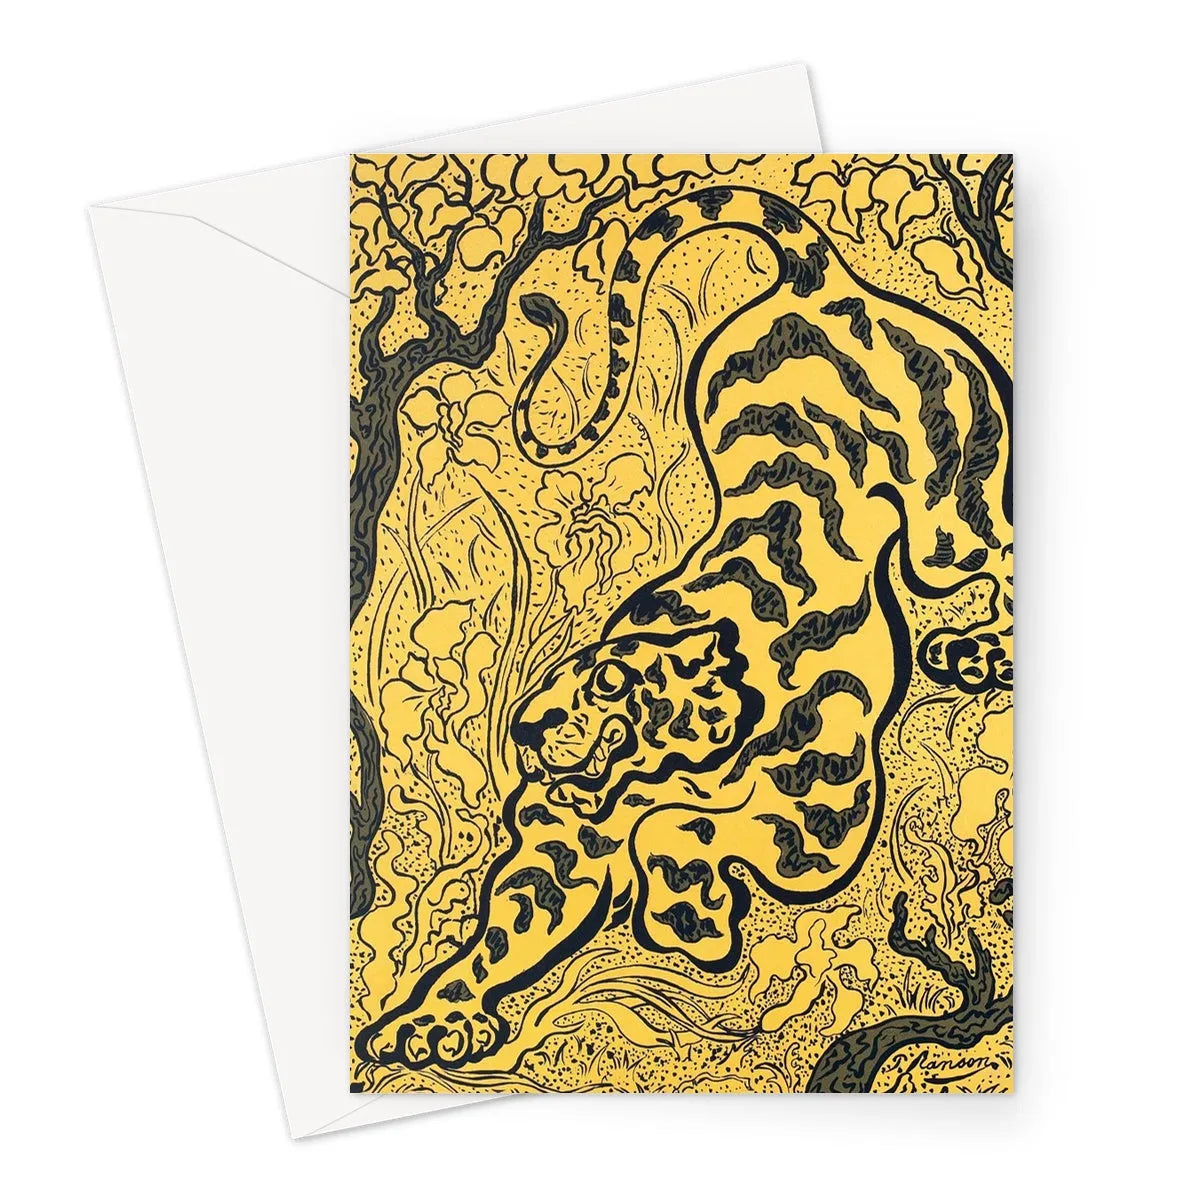 Tiger In The Jungle By Paul Ranson Greeting Card - A5 Portrait / 1 Card - Notebooks & Notepads - Aesthetic Art